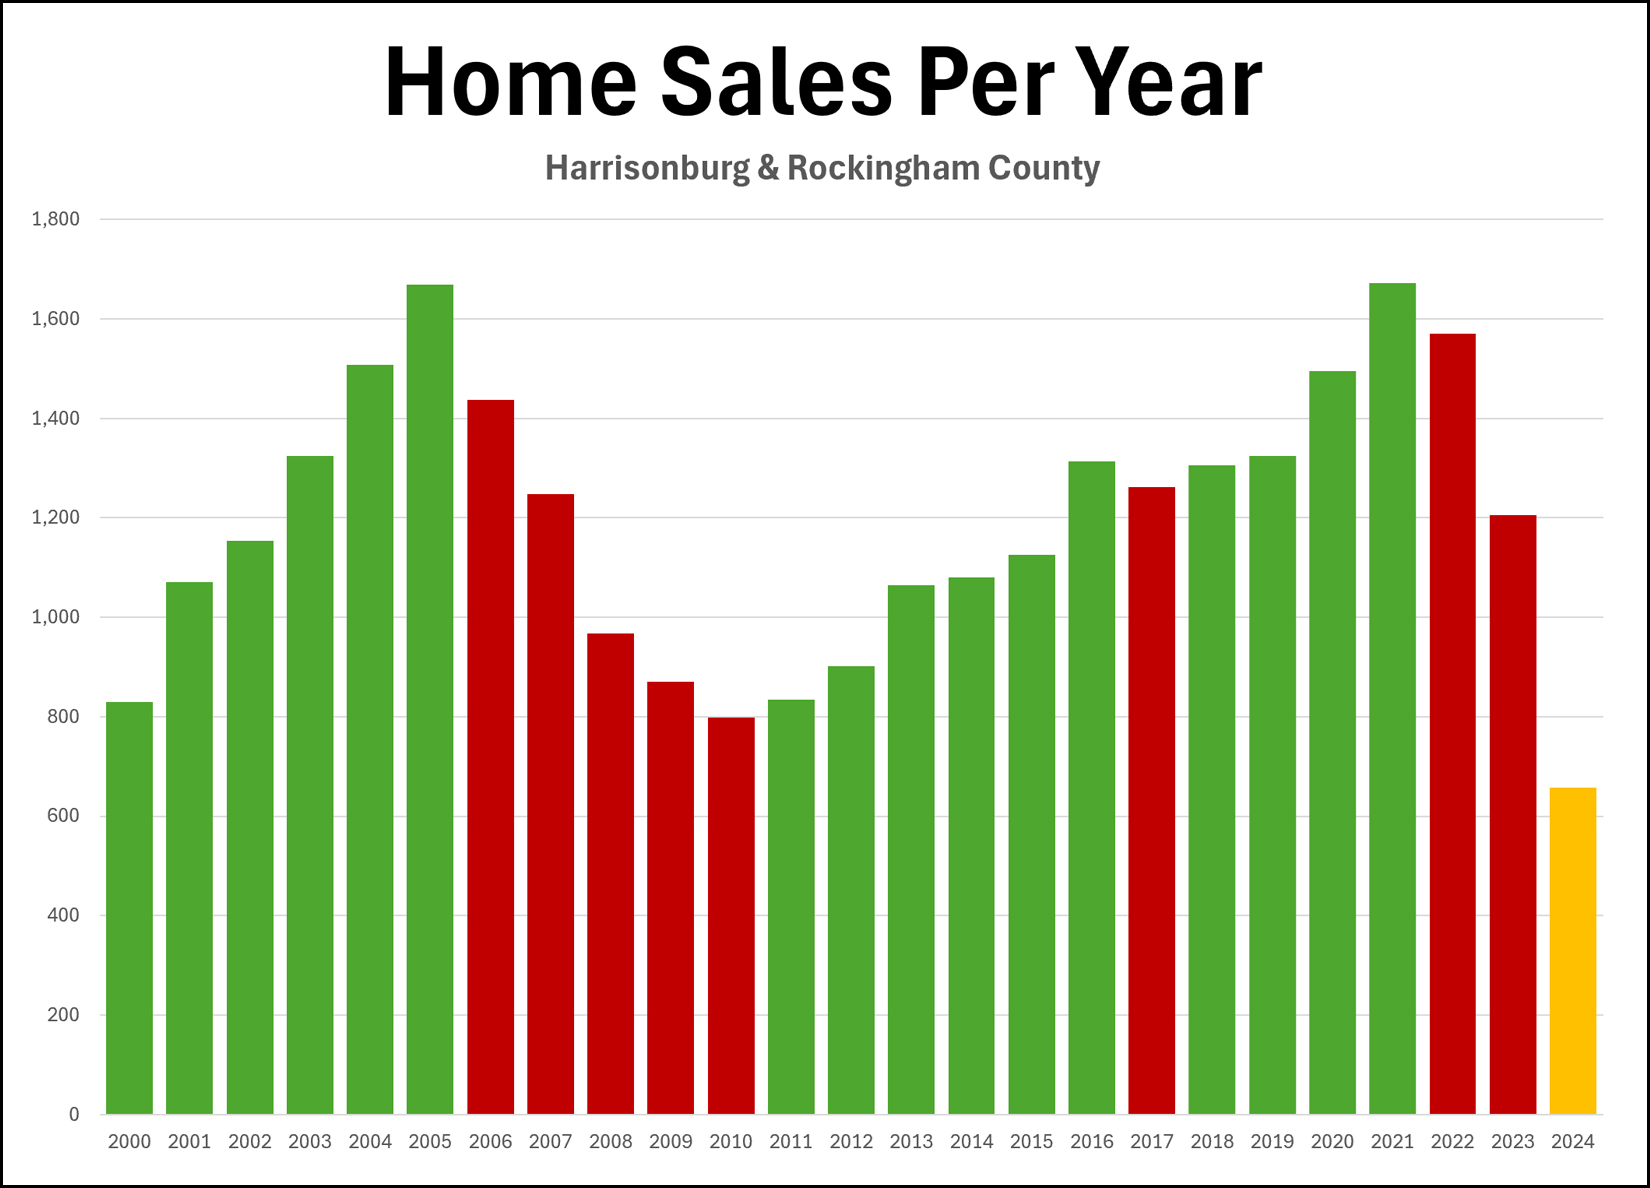 Home Sales Per Year